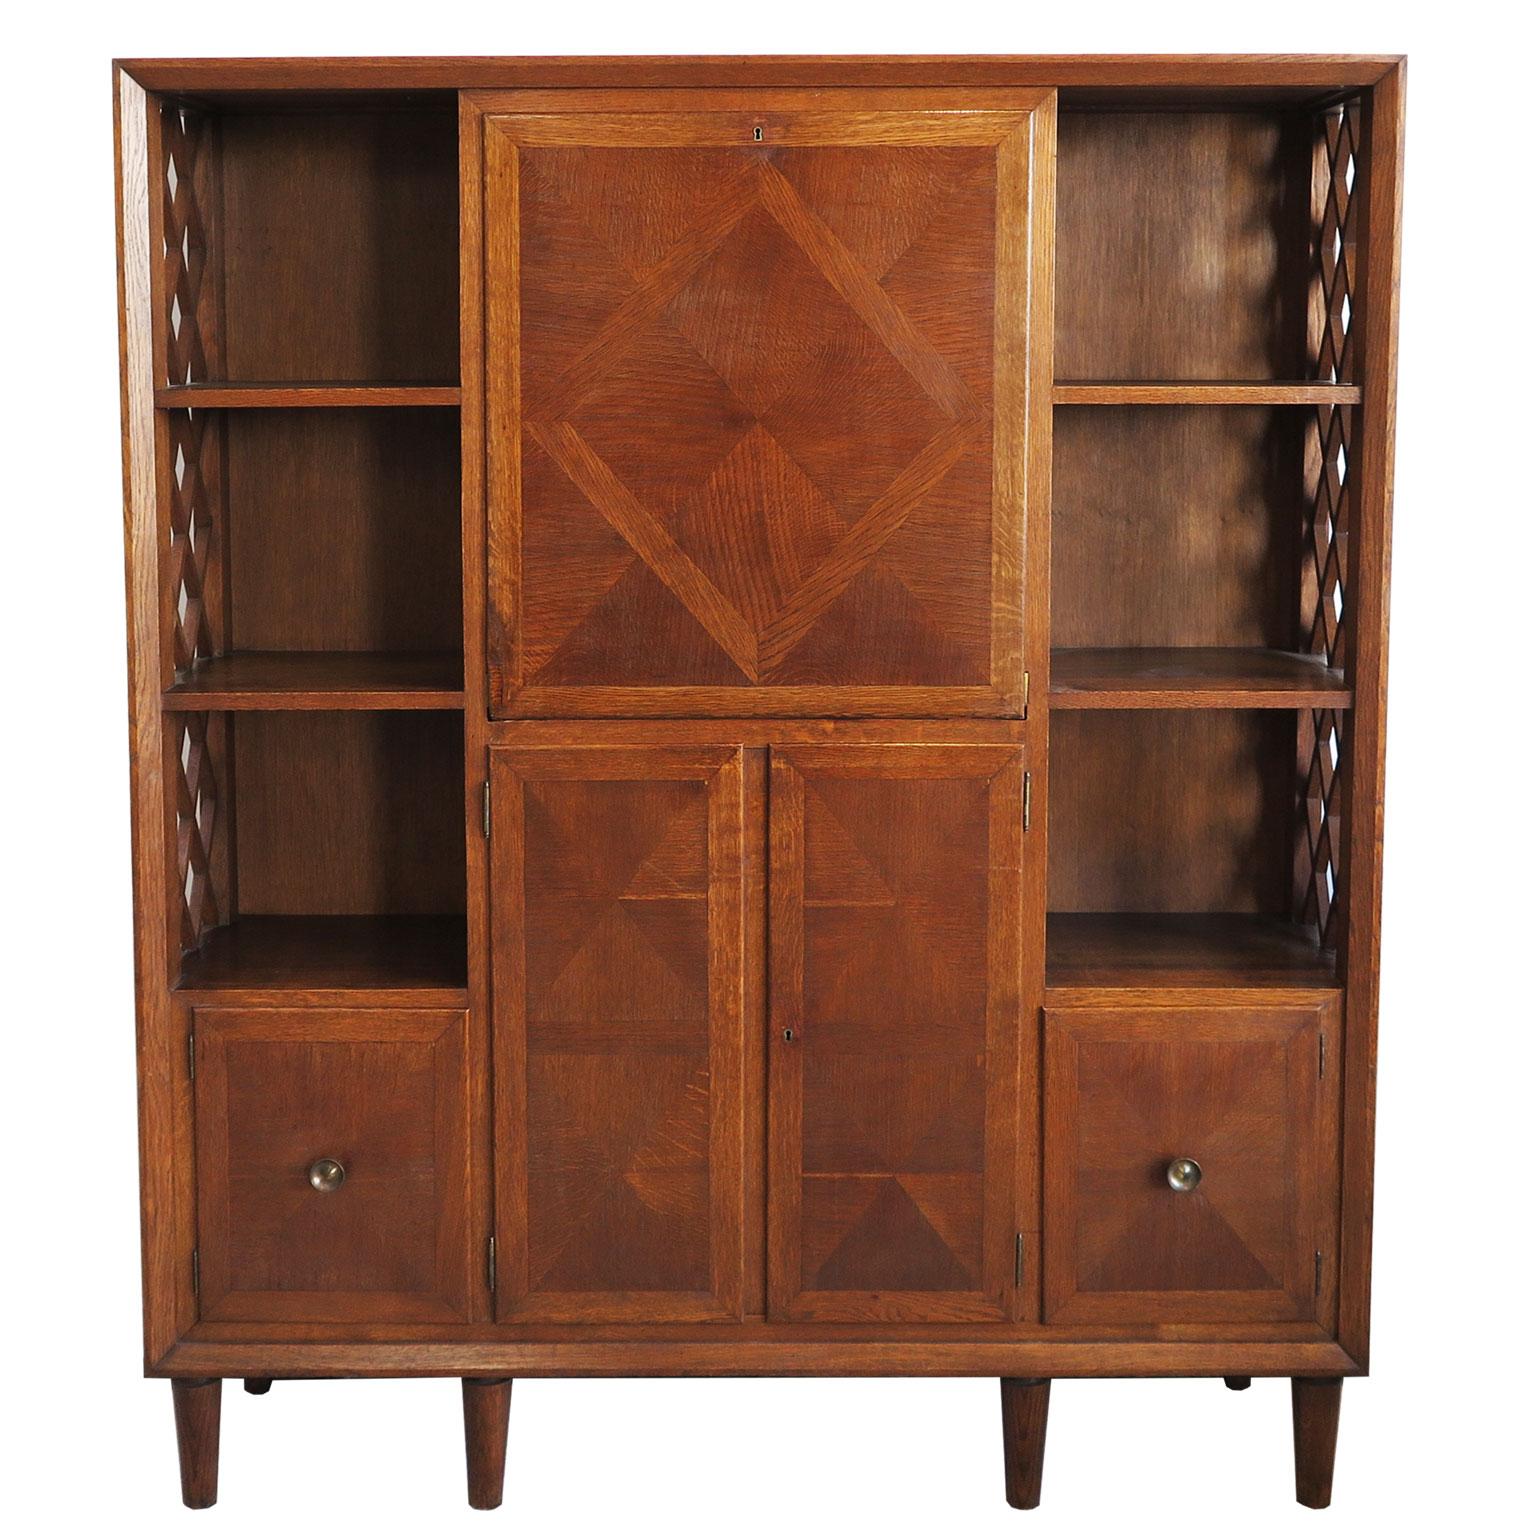 Early midcentury cabinet attributed to E. Lanzia from Italy circa 1940s. The oak frame features subtle parquetry inlay designs with trellis detailing on the sides. It houses four cabinets and six niches. 
Ideal to store kitchenware or to use as a